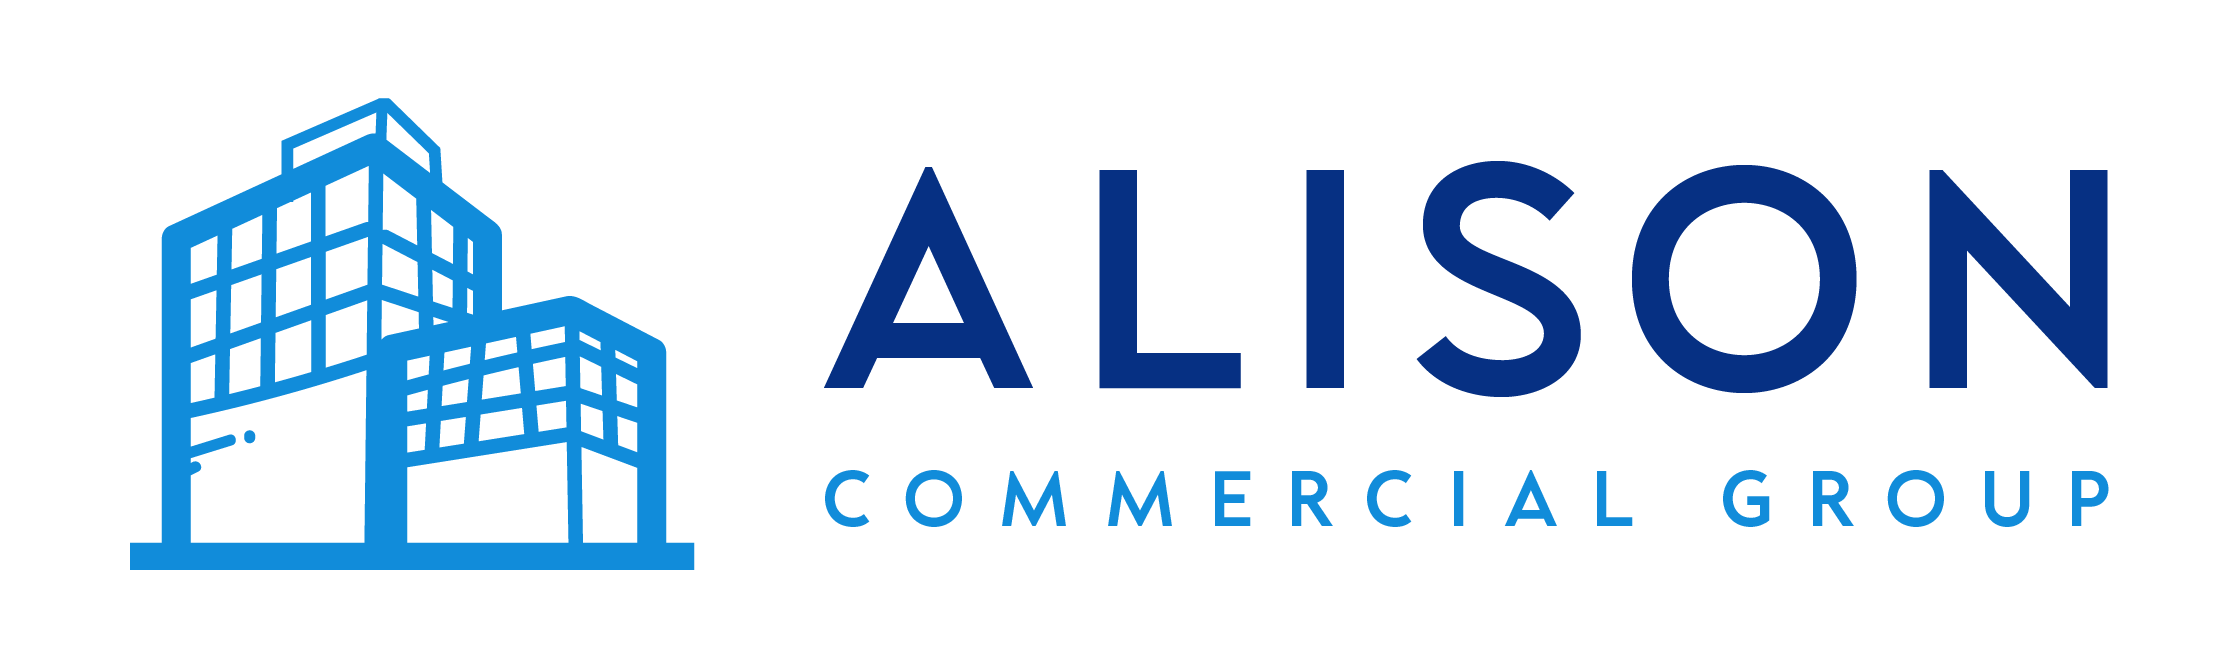 About us – Alison Commercial Group By KW Commercial